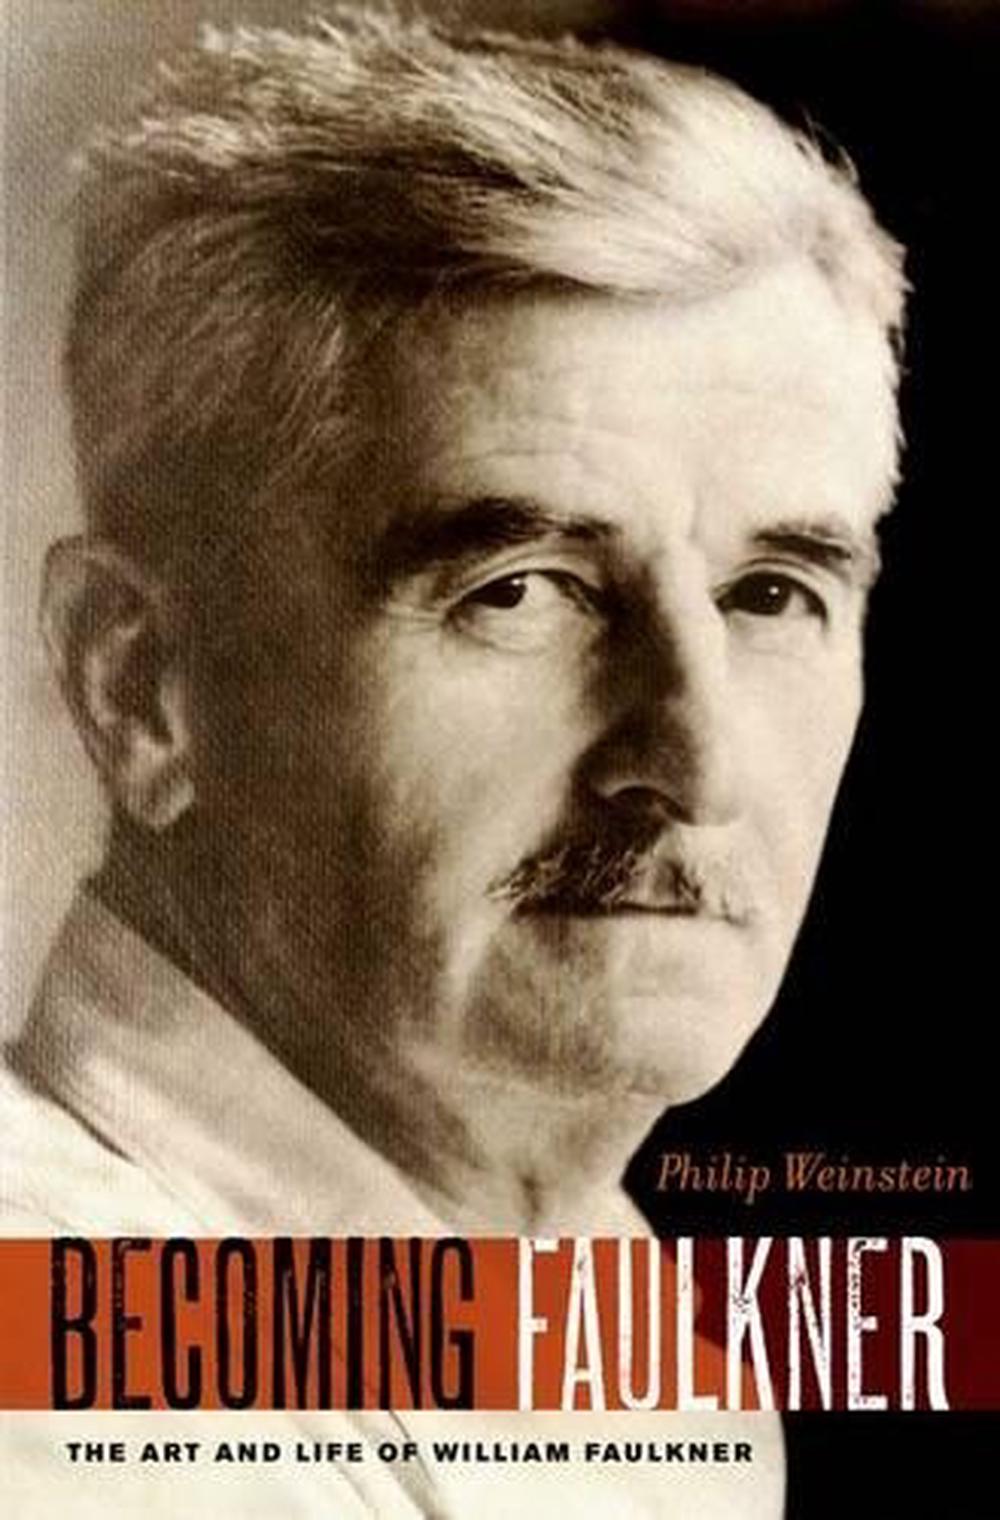 An Analysis Of William Faulkner And Ernest